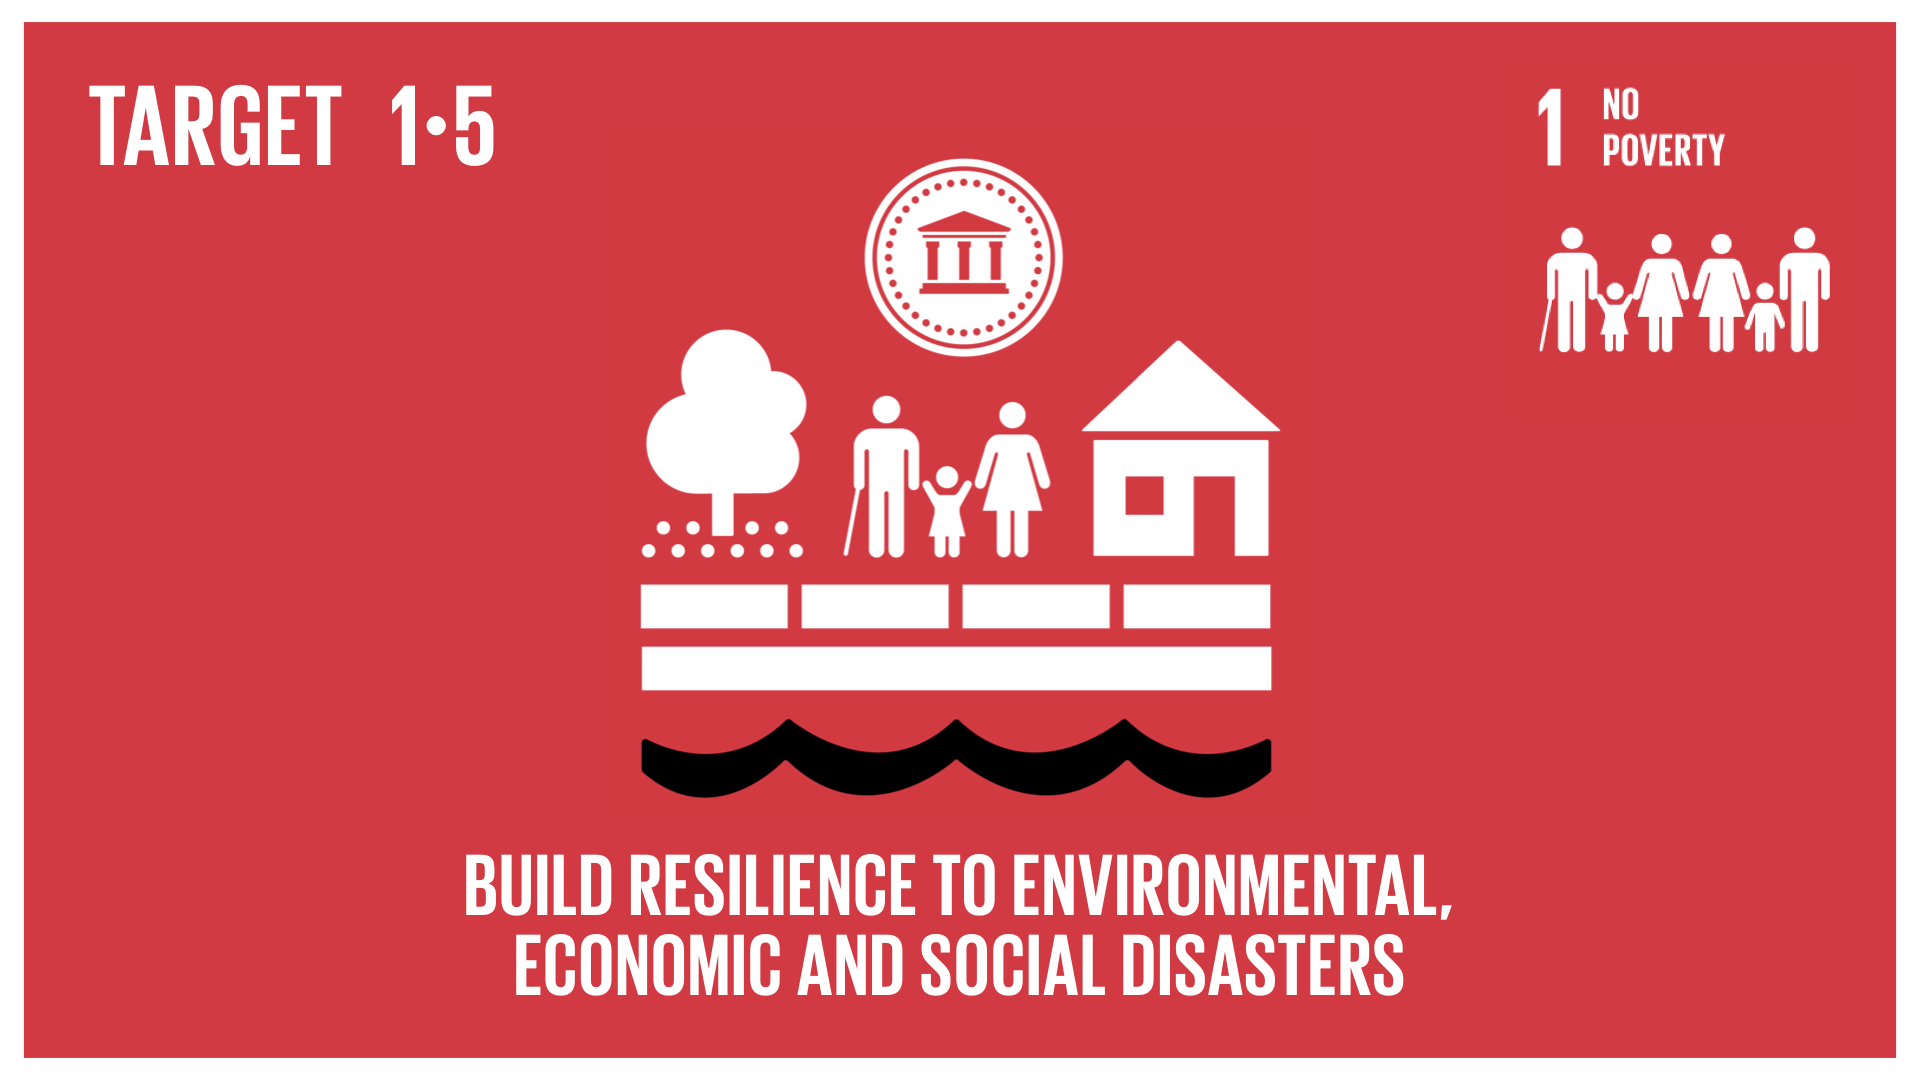 Graphic displaying the building of resilience of the poor and those in vulnerable situations to environmental, economic and social disasters  